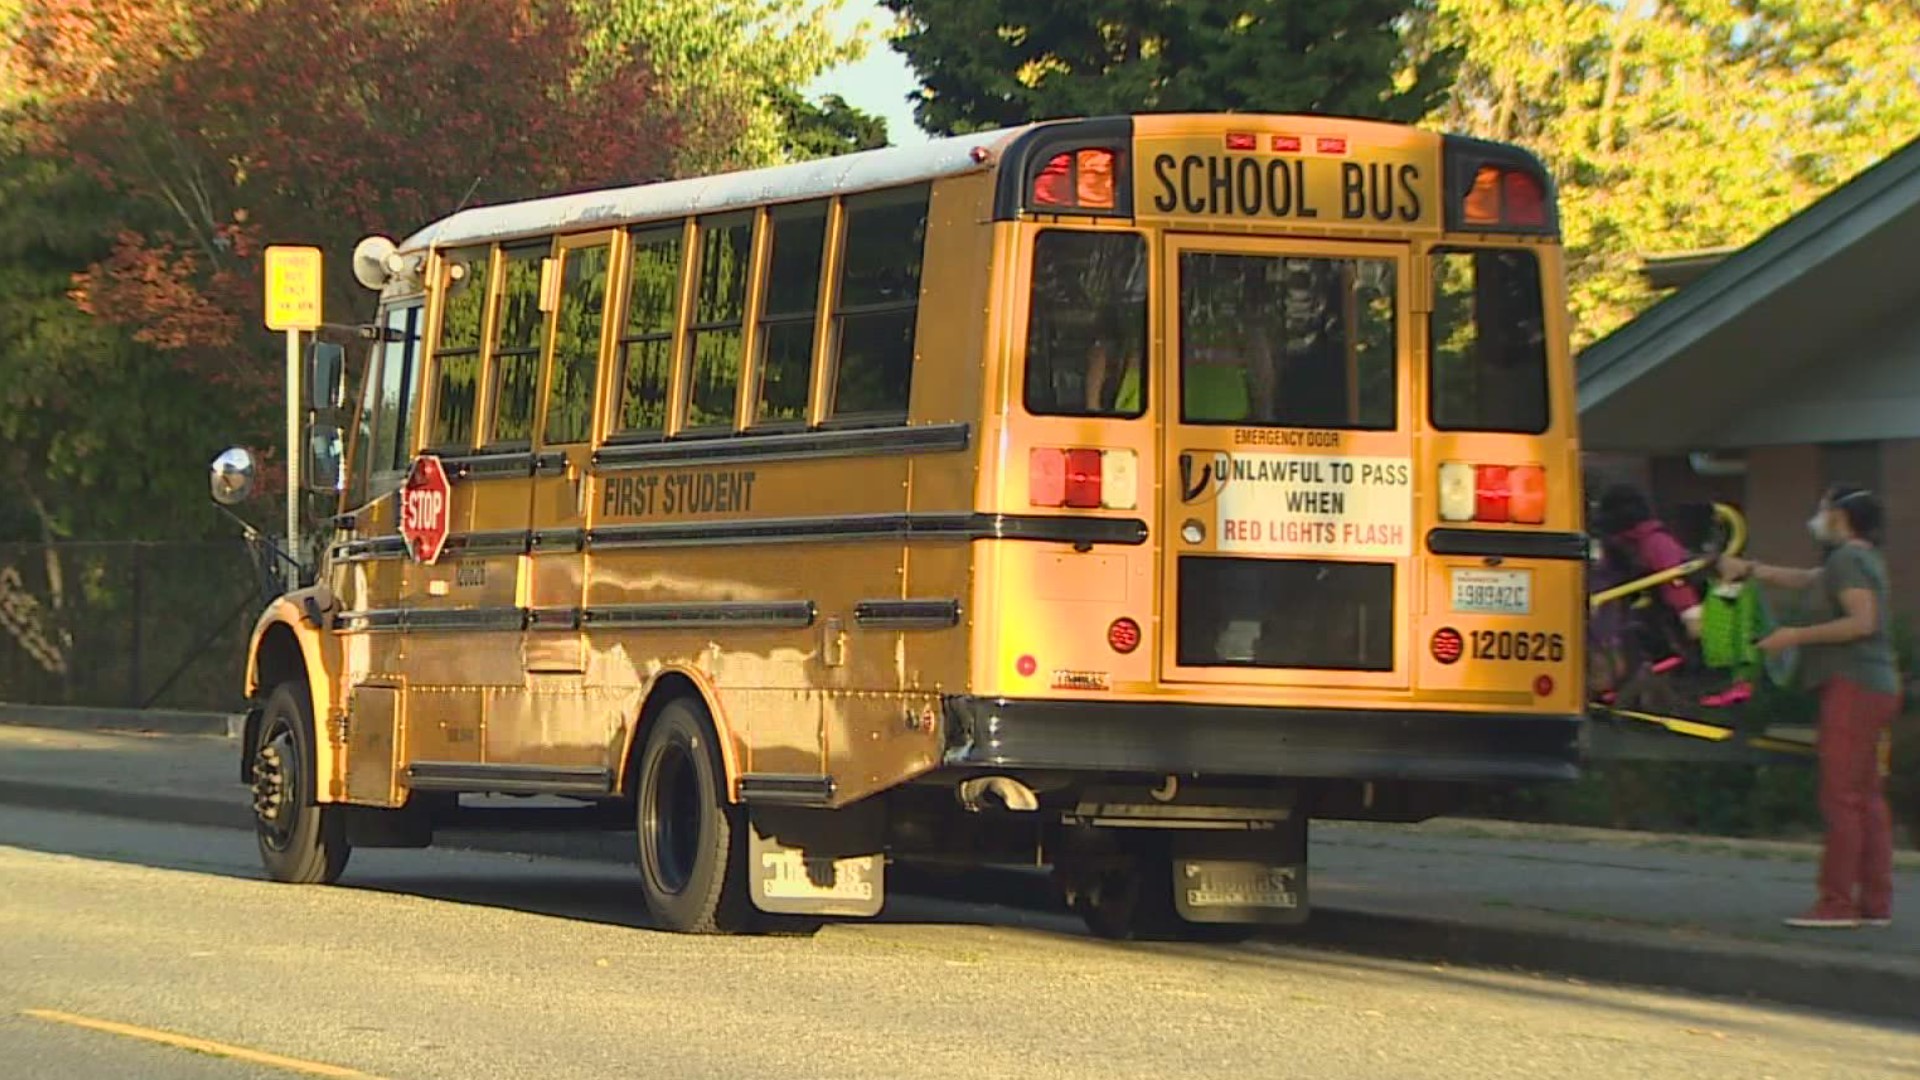 The nationwide bus driver shortage continues to impact families in the Seattle Public Schools district, with some bus routes facing up to two-hour delays.